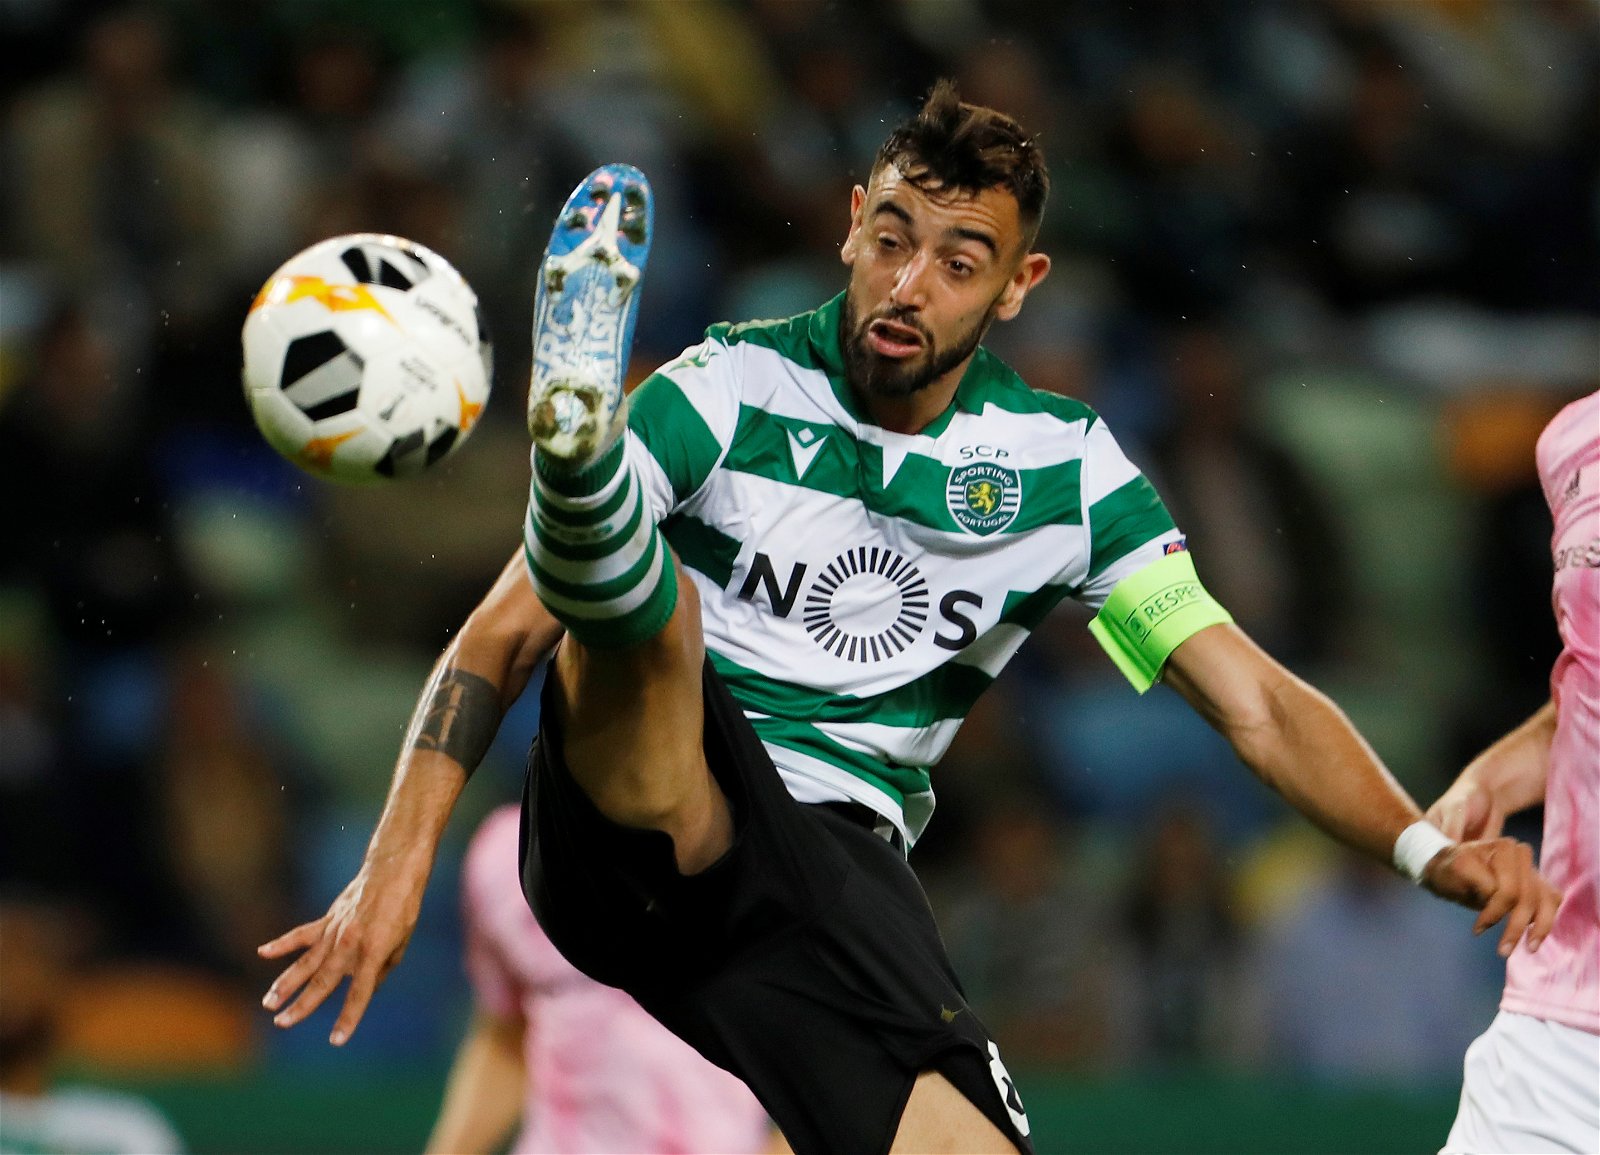 Manchester United midfield target Bruno Fernandes relaxed over Old Trafford rumors